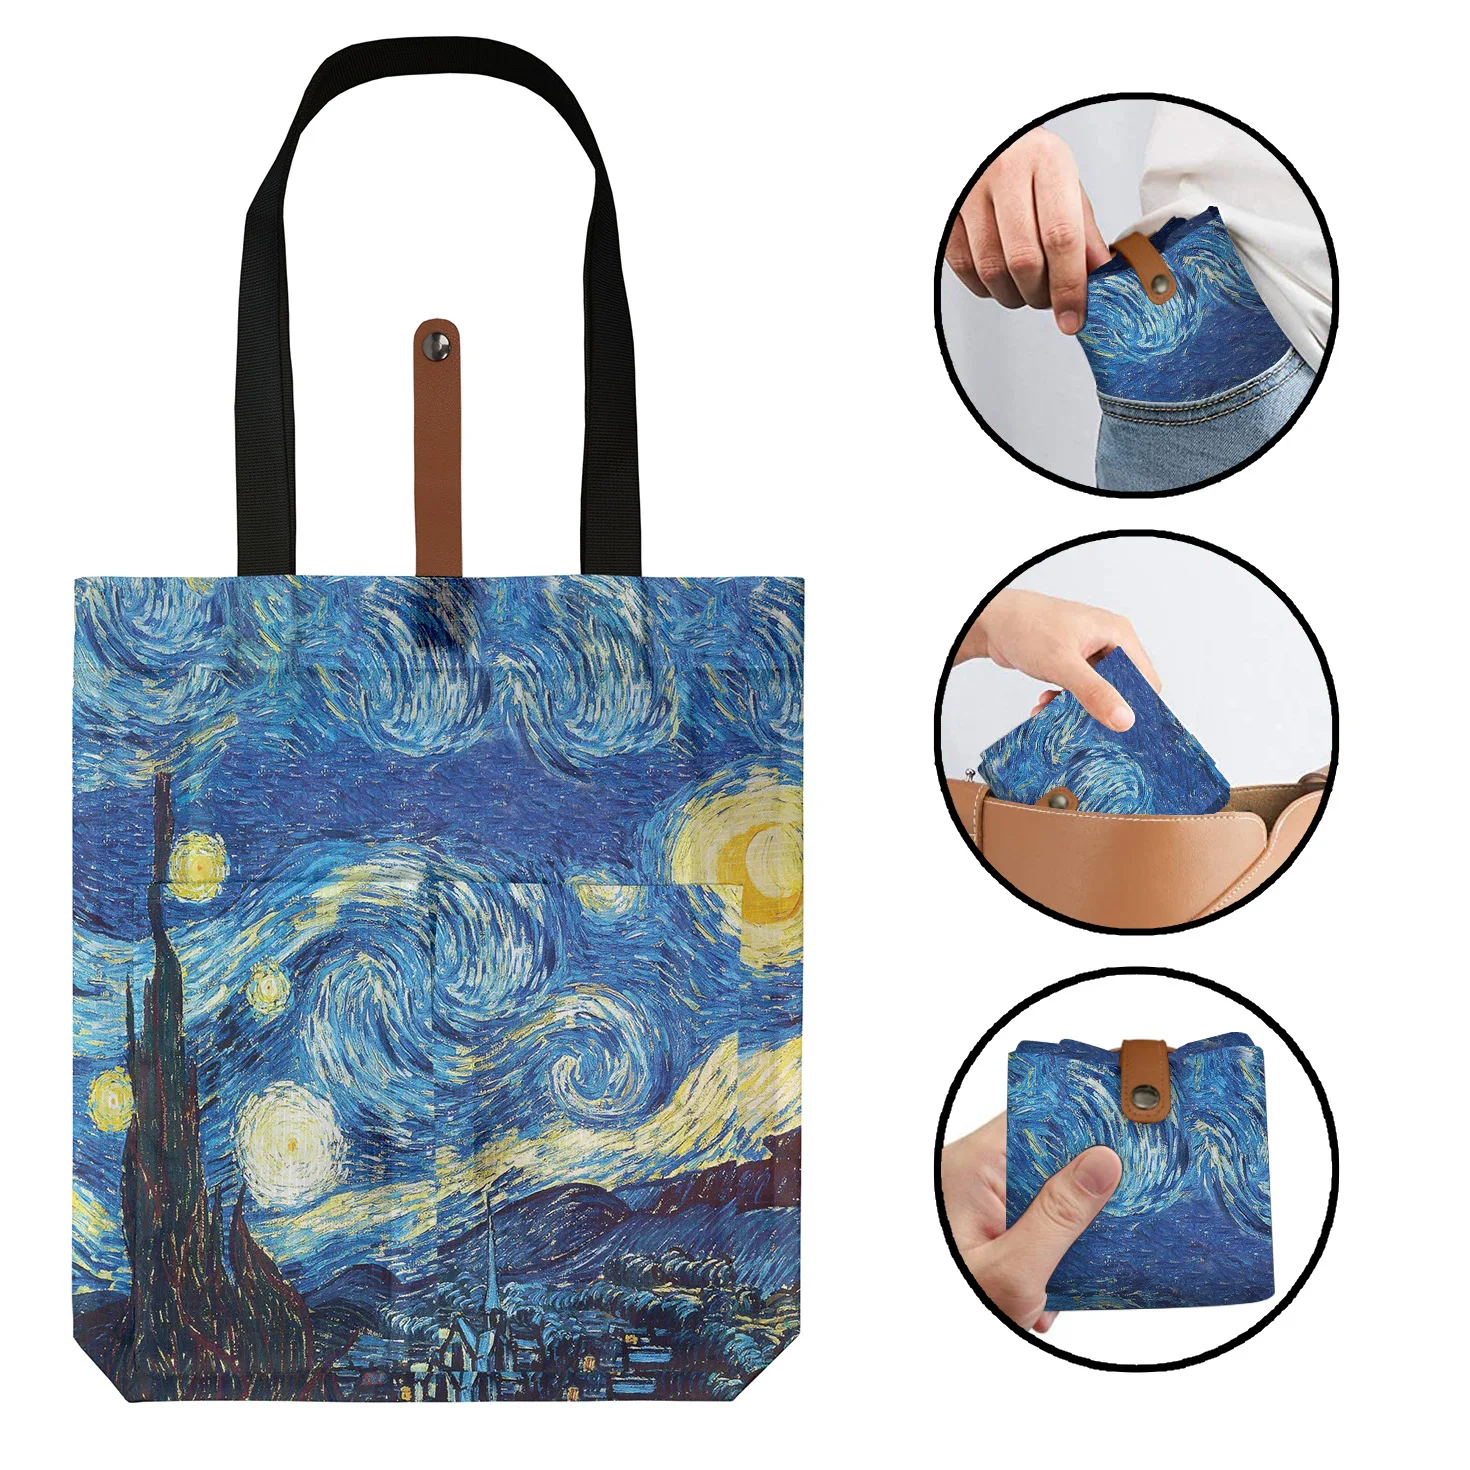 Customize polyester Oil Painting Van Gogh Print Tote Bags Reusable Shopping Bag For Groceries Shoulder Bags home storage bag